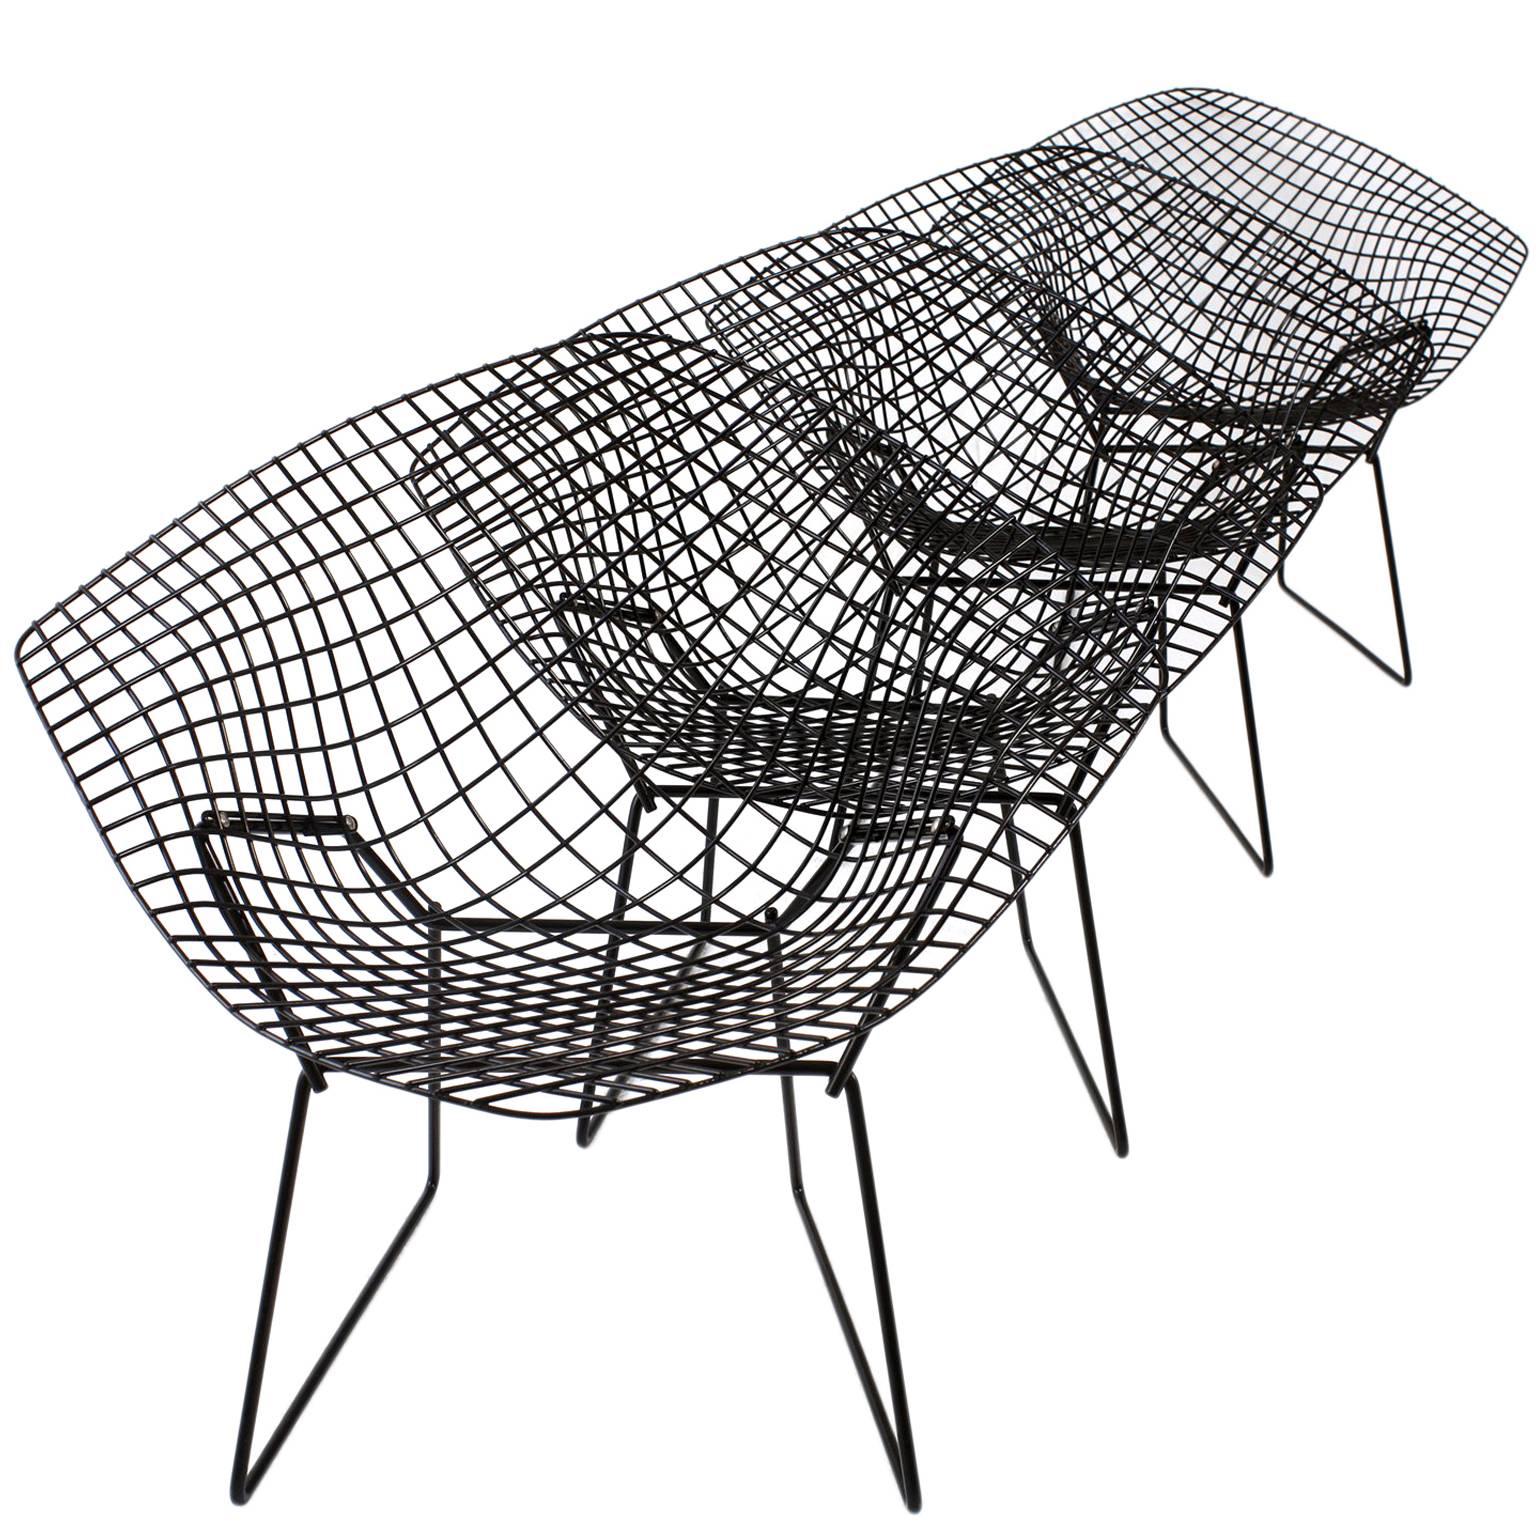 Set of Four Diamond Chairs by Harry Bertoia for Knoll